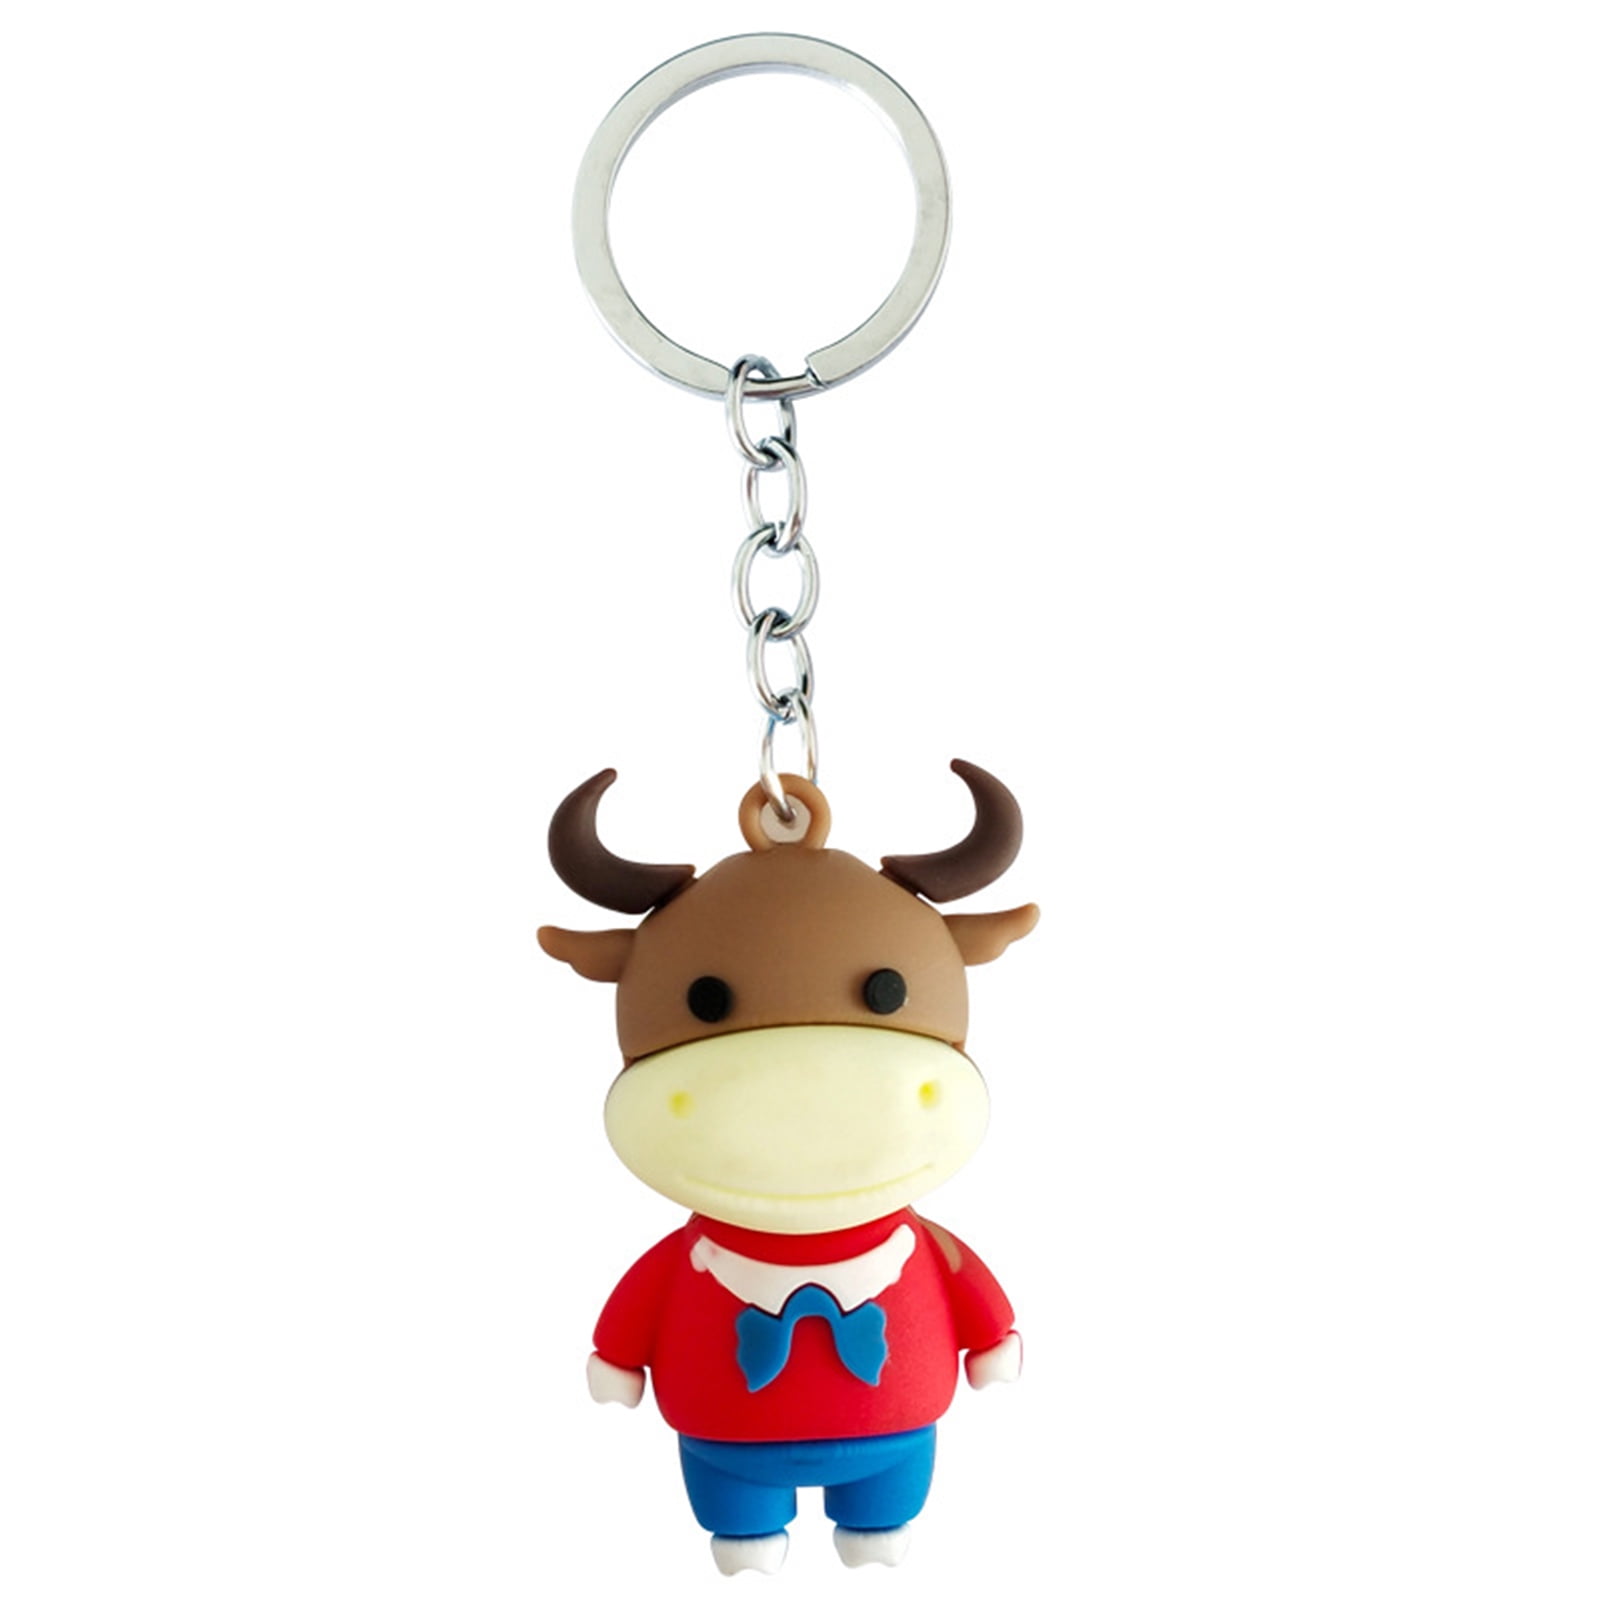 Mini Little Cow Animal Funny LED Keychain with Sound Key Holder Torch Flashlight